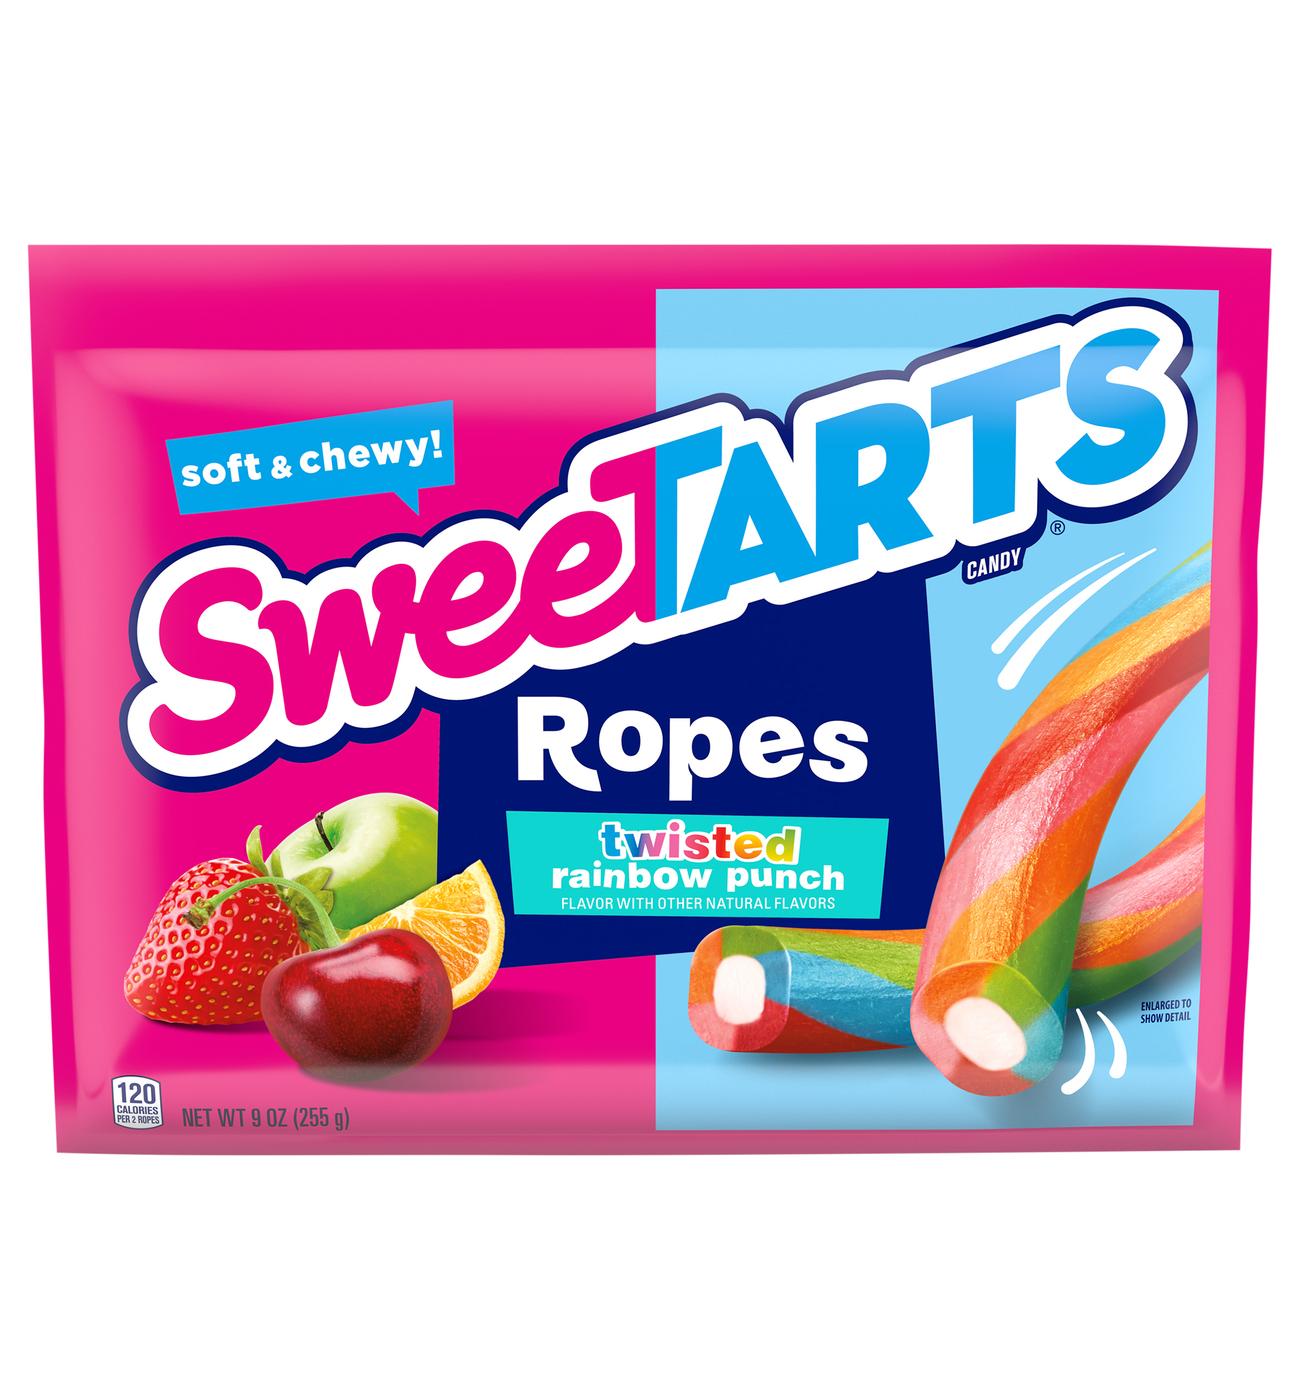 SweeTARTS Twisted Rainbow Punch Soft & Chewy Ropes; image 1 of 2